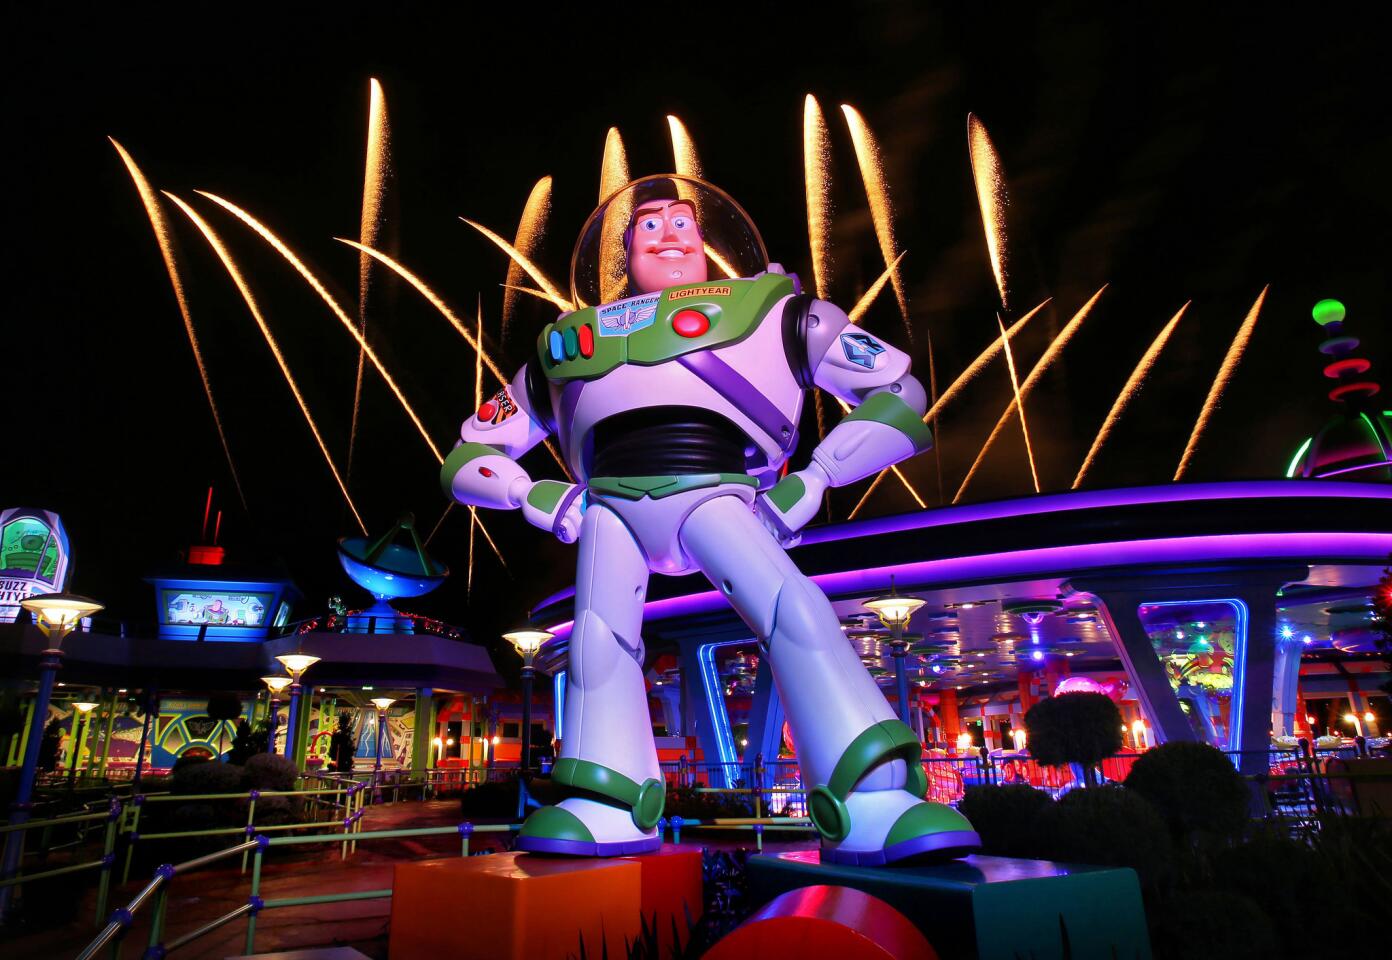 Fireworks launch behind Toy Story Land star Buzz Lightyear, during a first nighttime look at the new section of Disney's Hollywood Studios at Walt Disney World, in Lake Buena Vista, Fla., Thursday, June 28, 2018. (Joe Burbank/Orlando Sentinel) 3052311